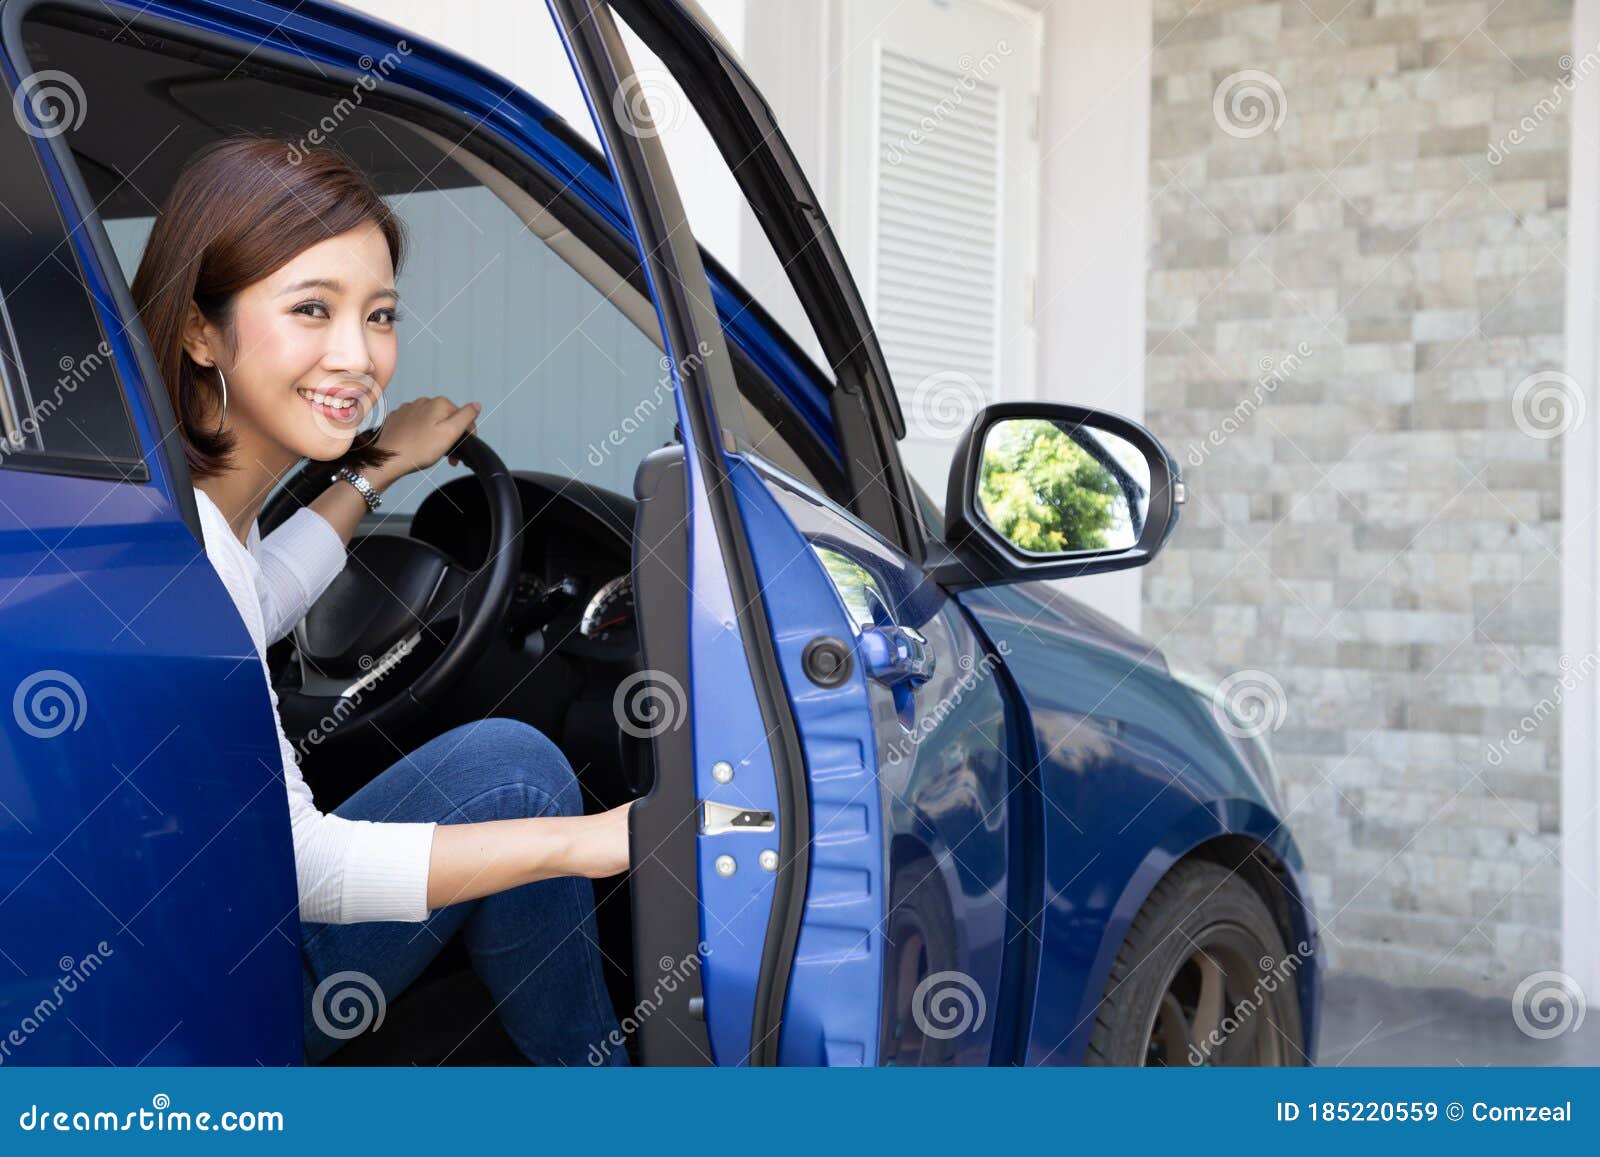 young asian woman getting out of a car or open door car.